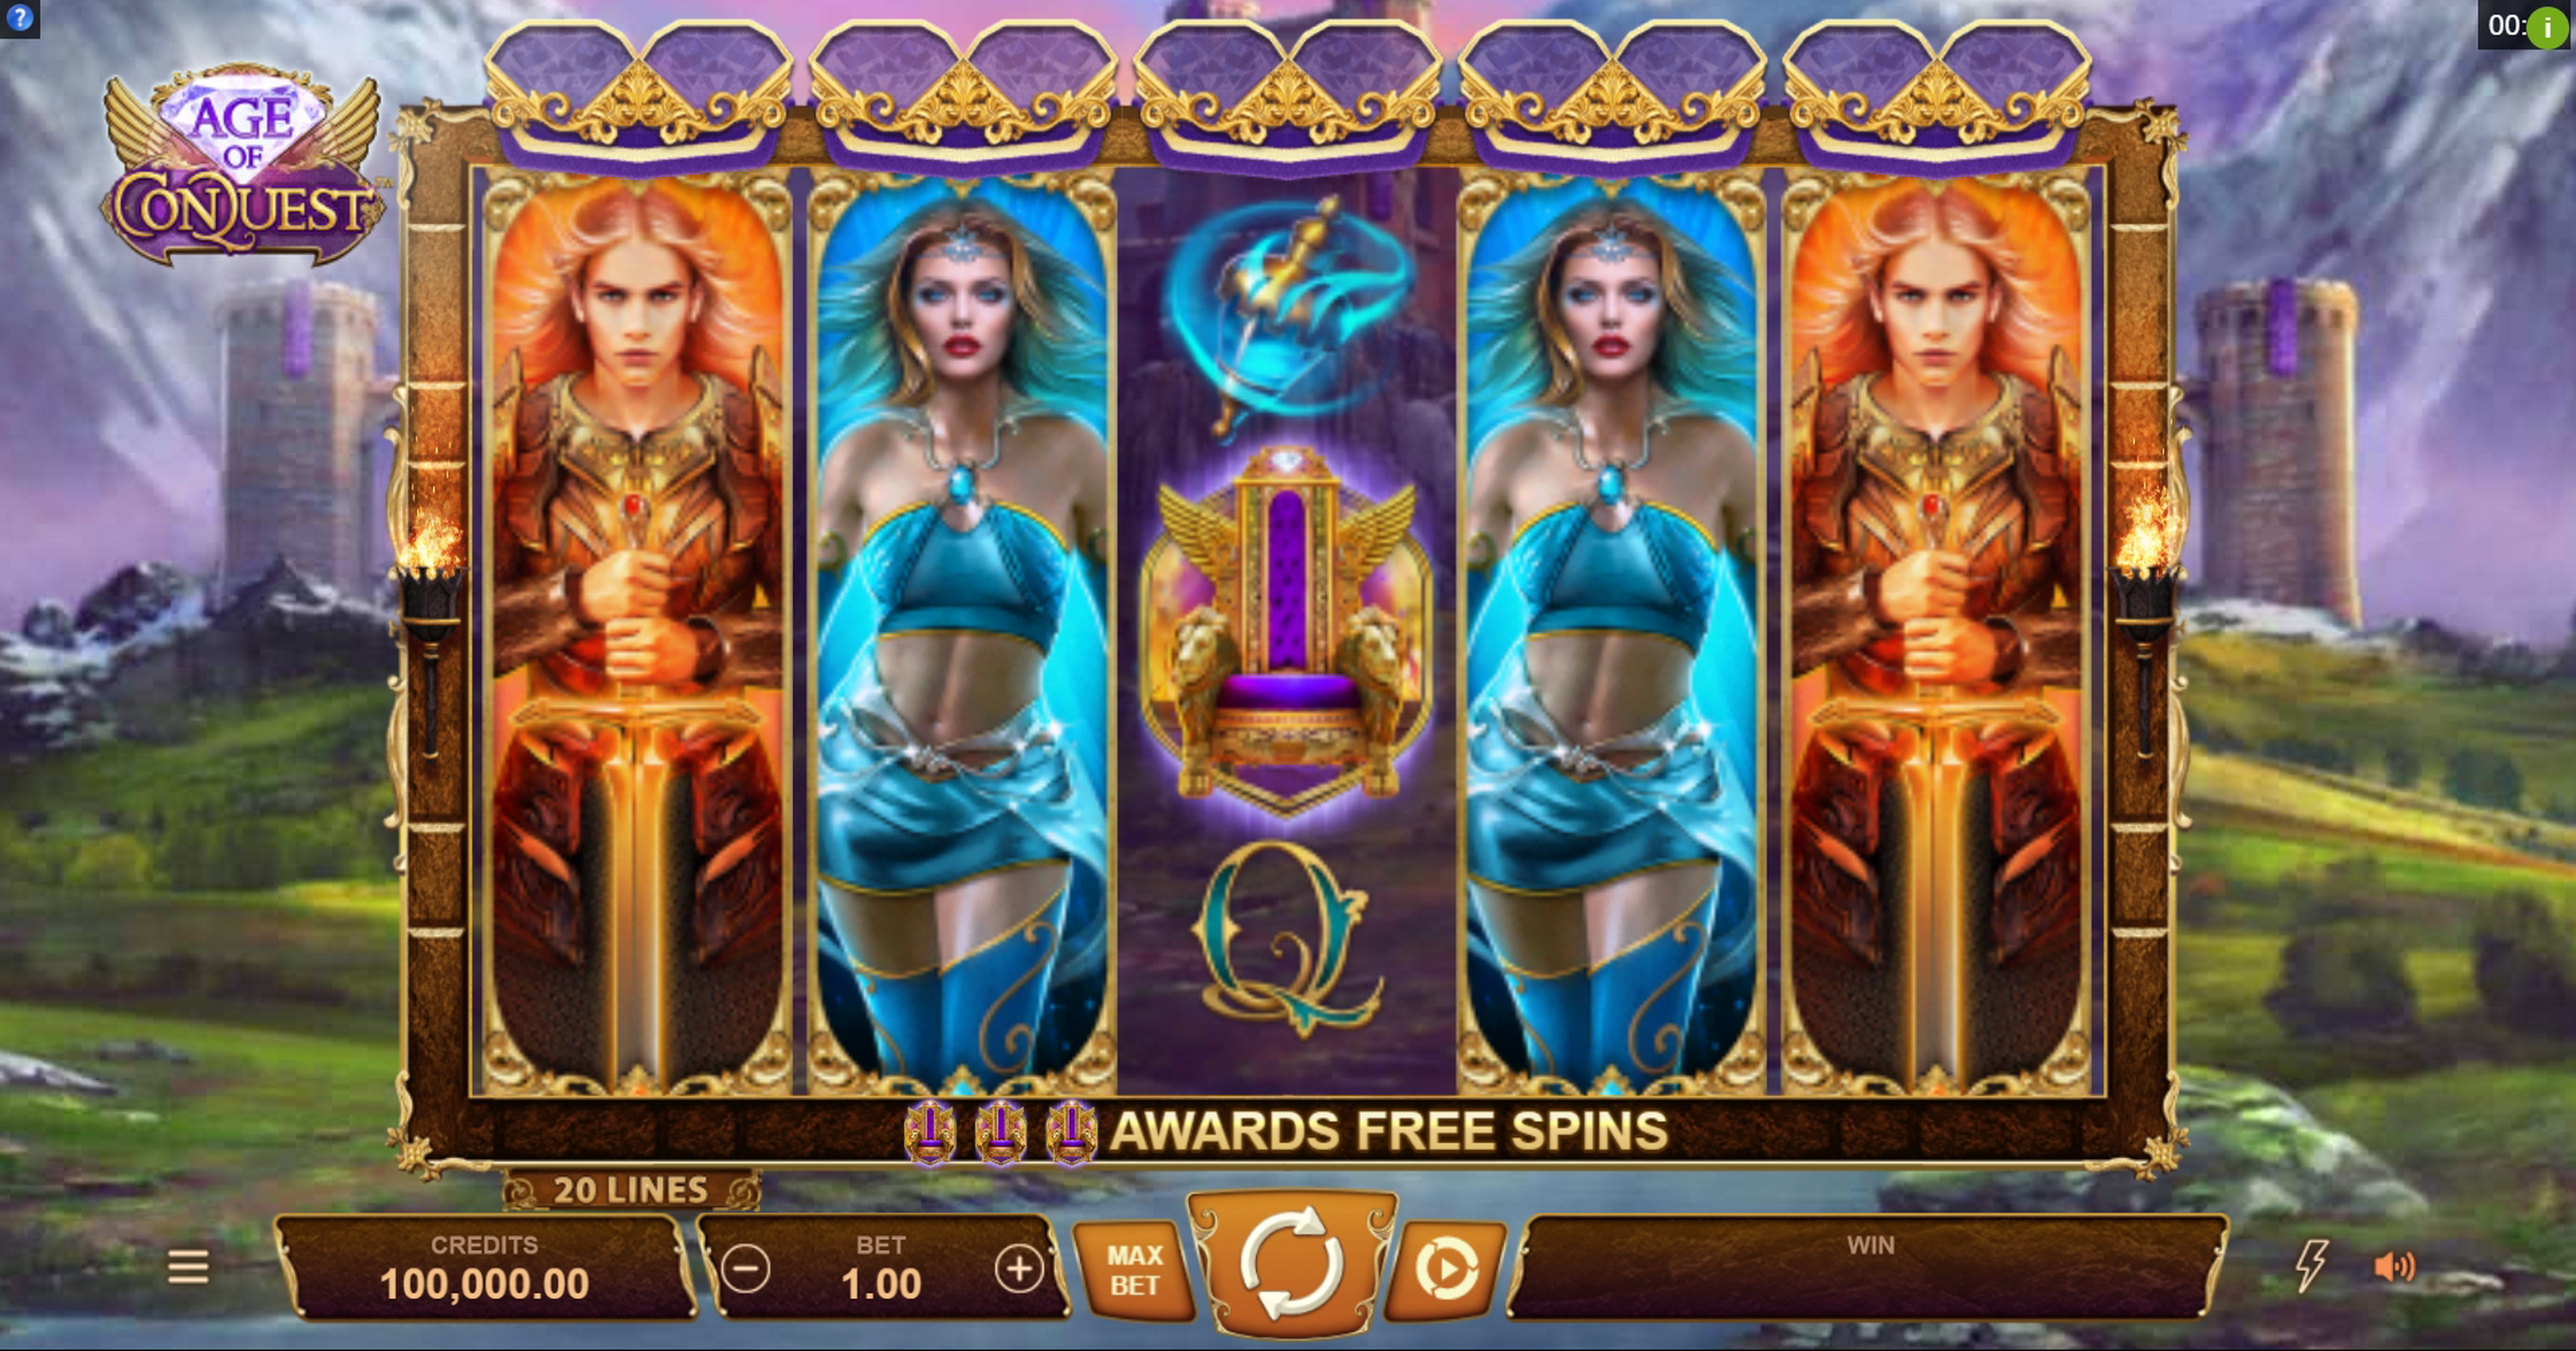 Reels in Age of Conquest Slot Game by Neon Valley Studios